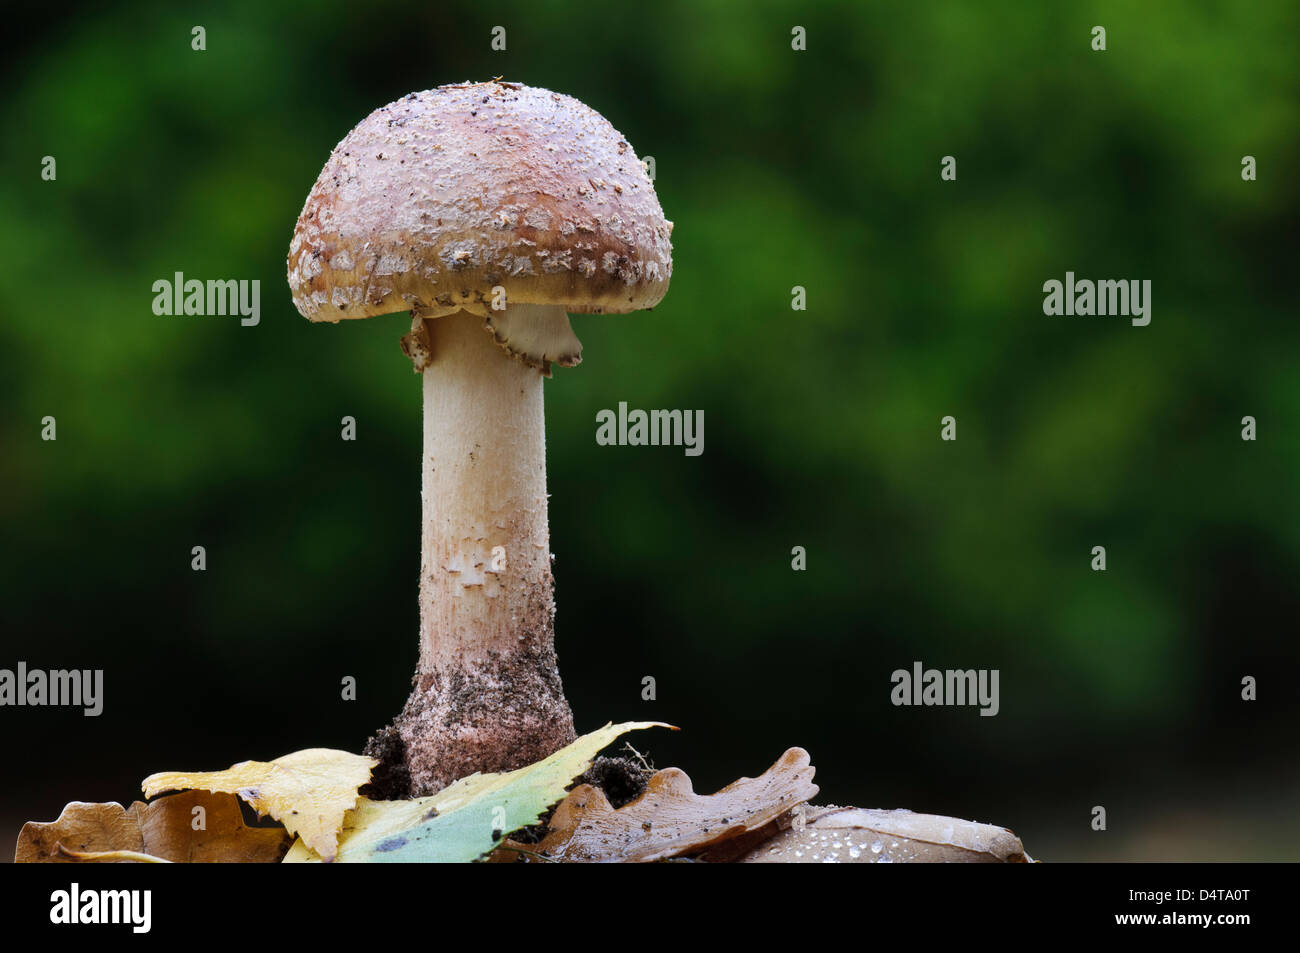 The blusher (Amanita rubescens) growing amidst fallen autumn leaves in Clumber Park, Nottinghamshire. October. Stock Photo